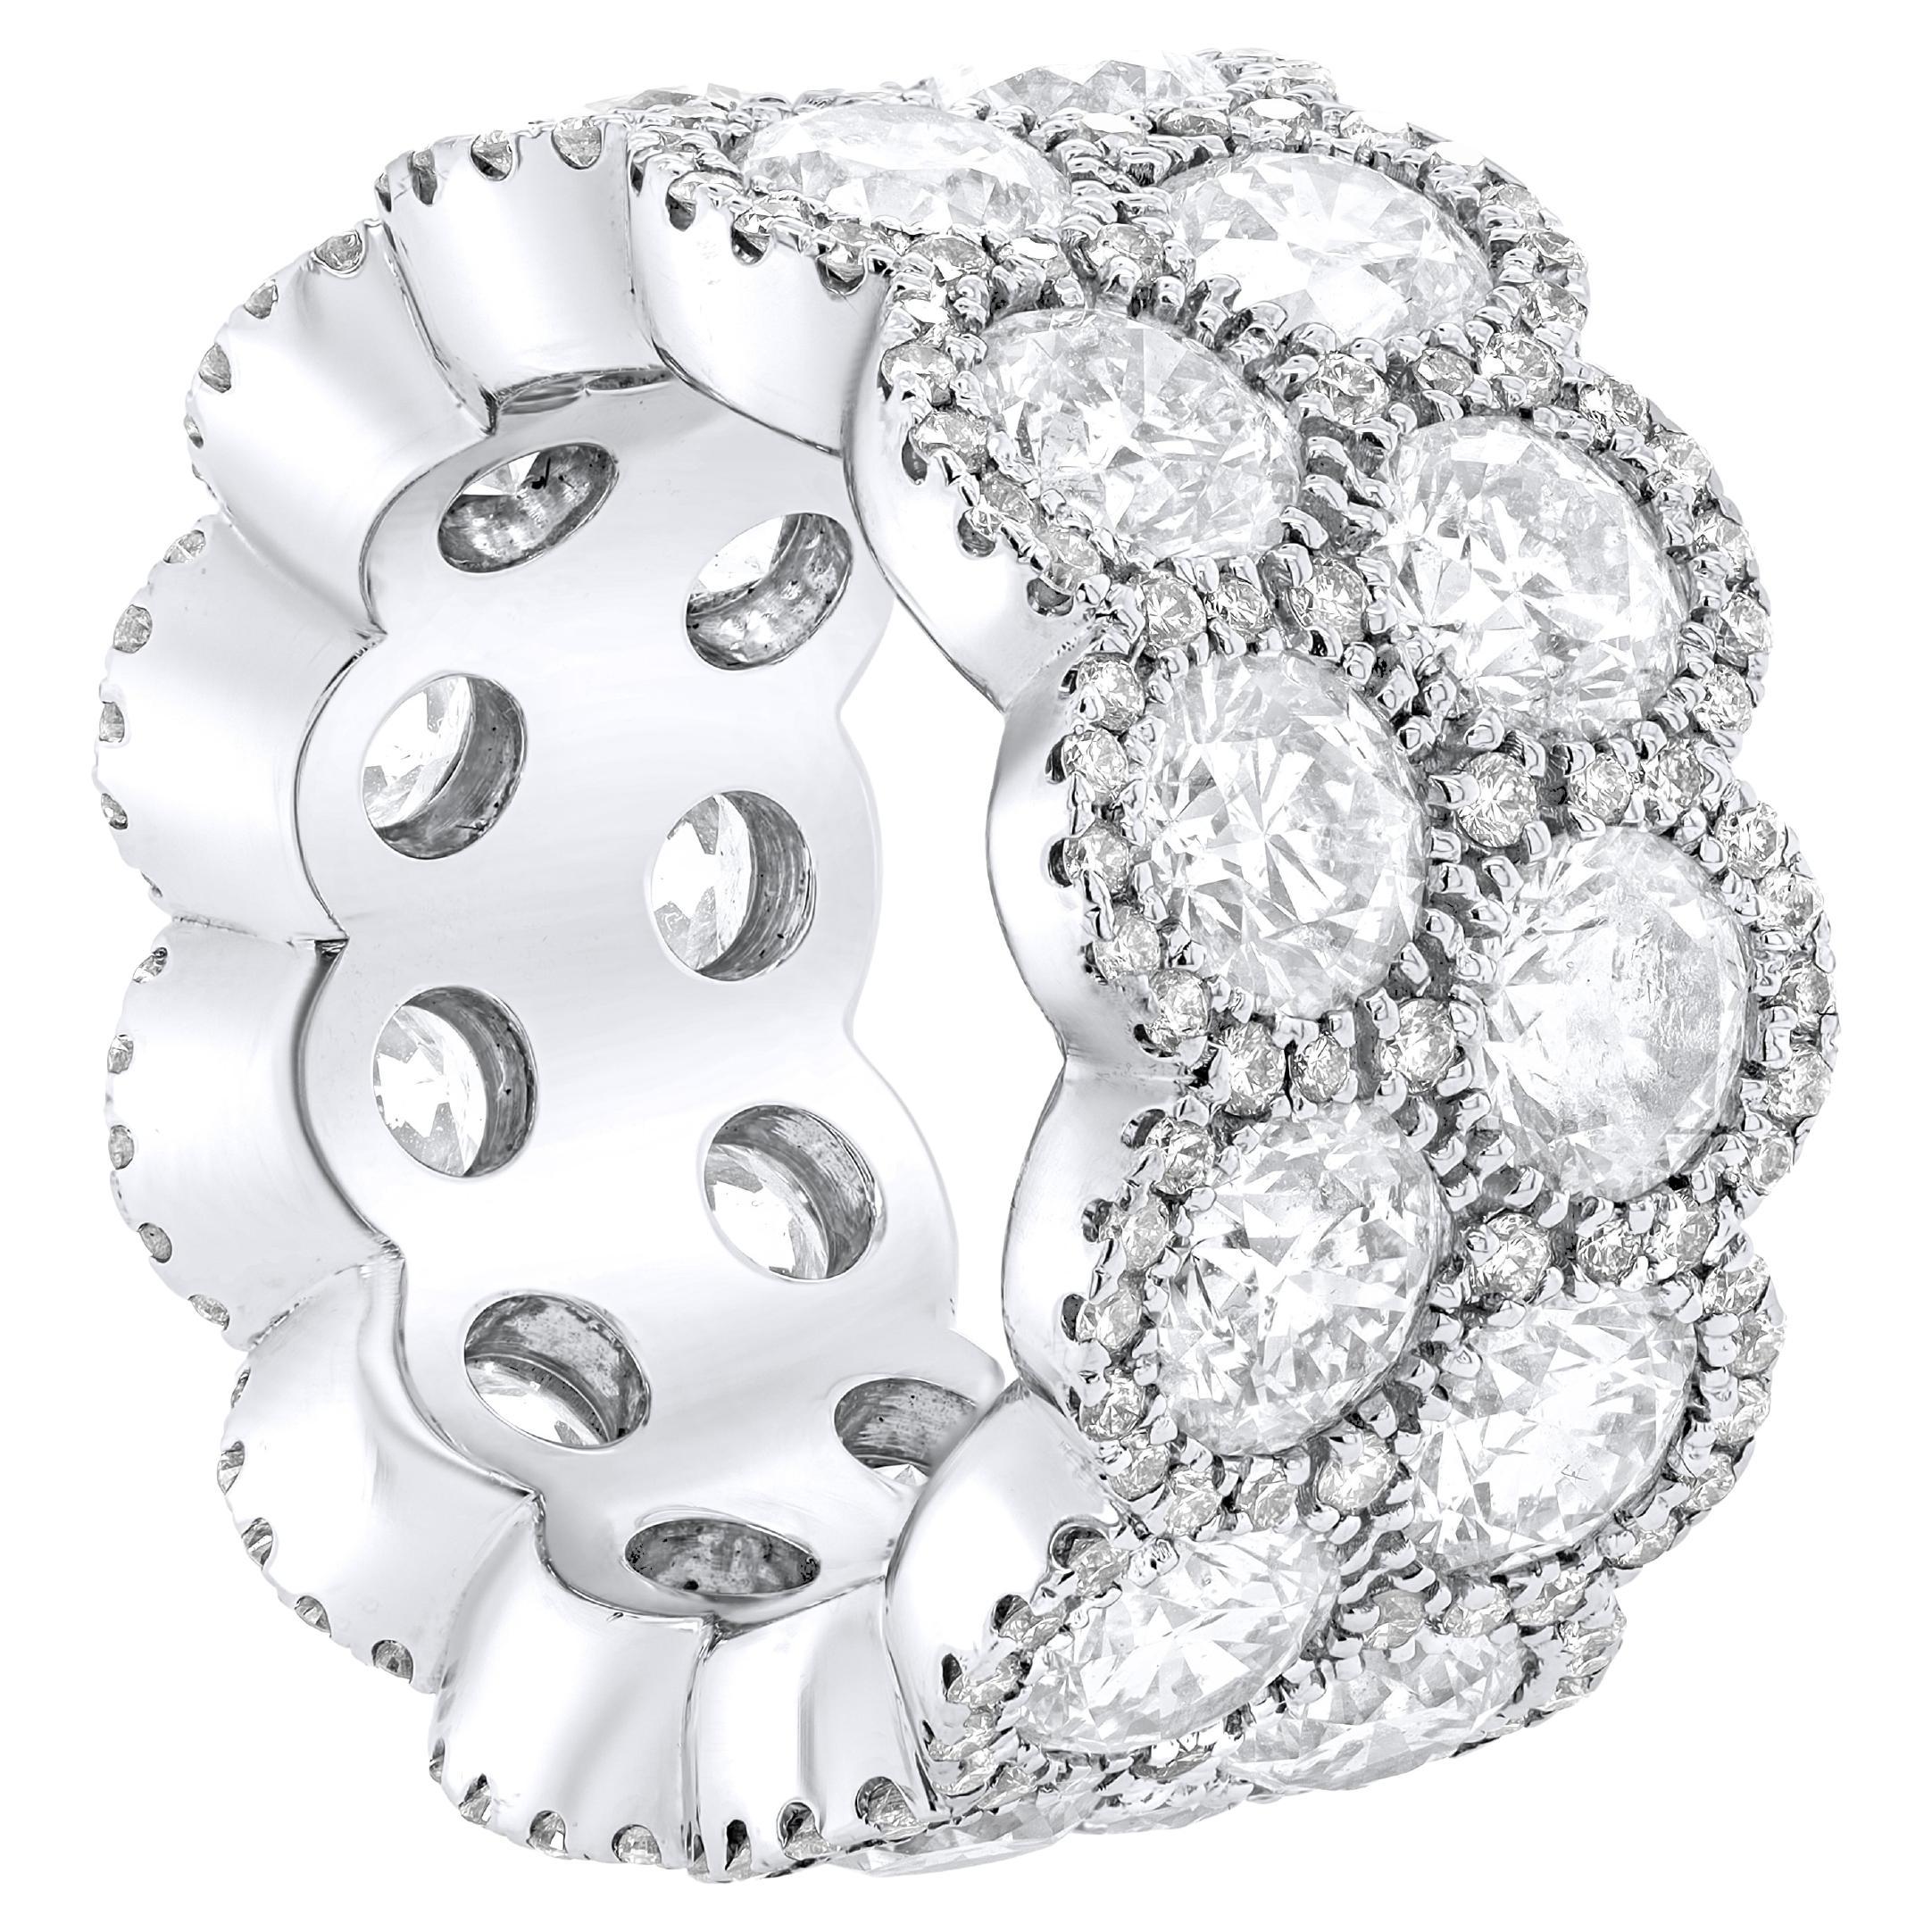 Diana M. platinum eternity band with halo setting features 12.06 ct of 24 round For Sale